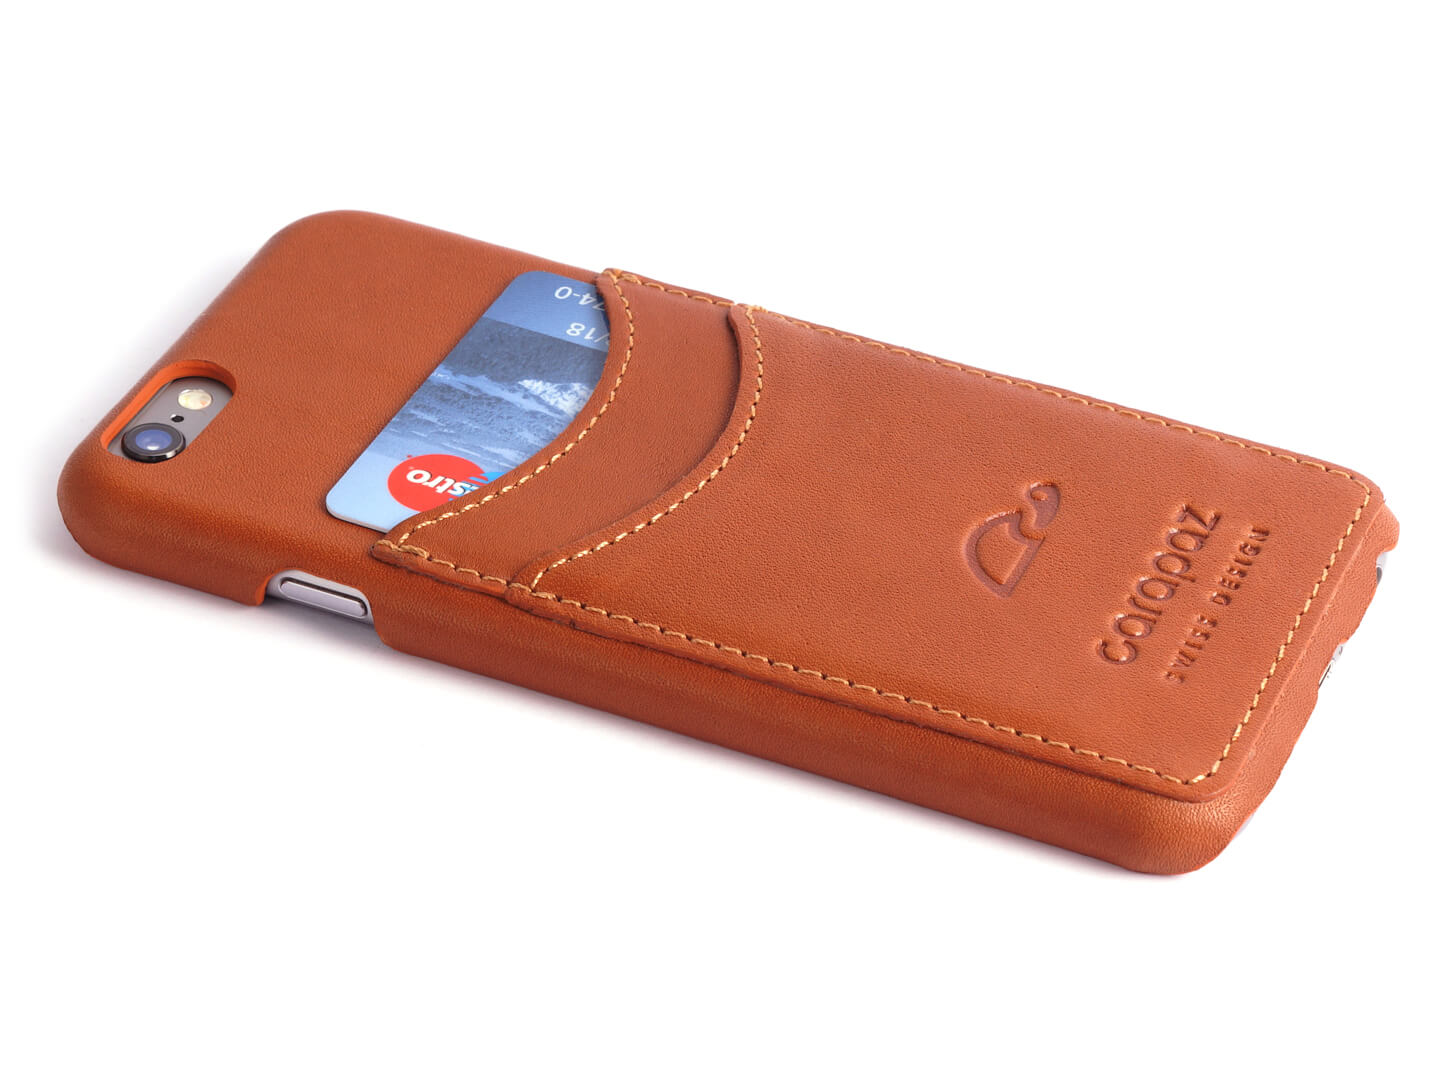 Leather case iPhone 6 with 2 cards slots - protection glass included - Carapaz